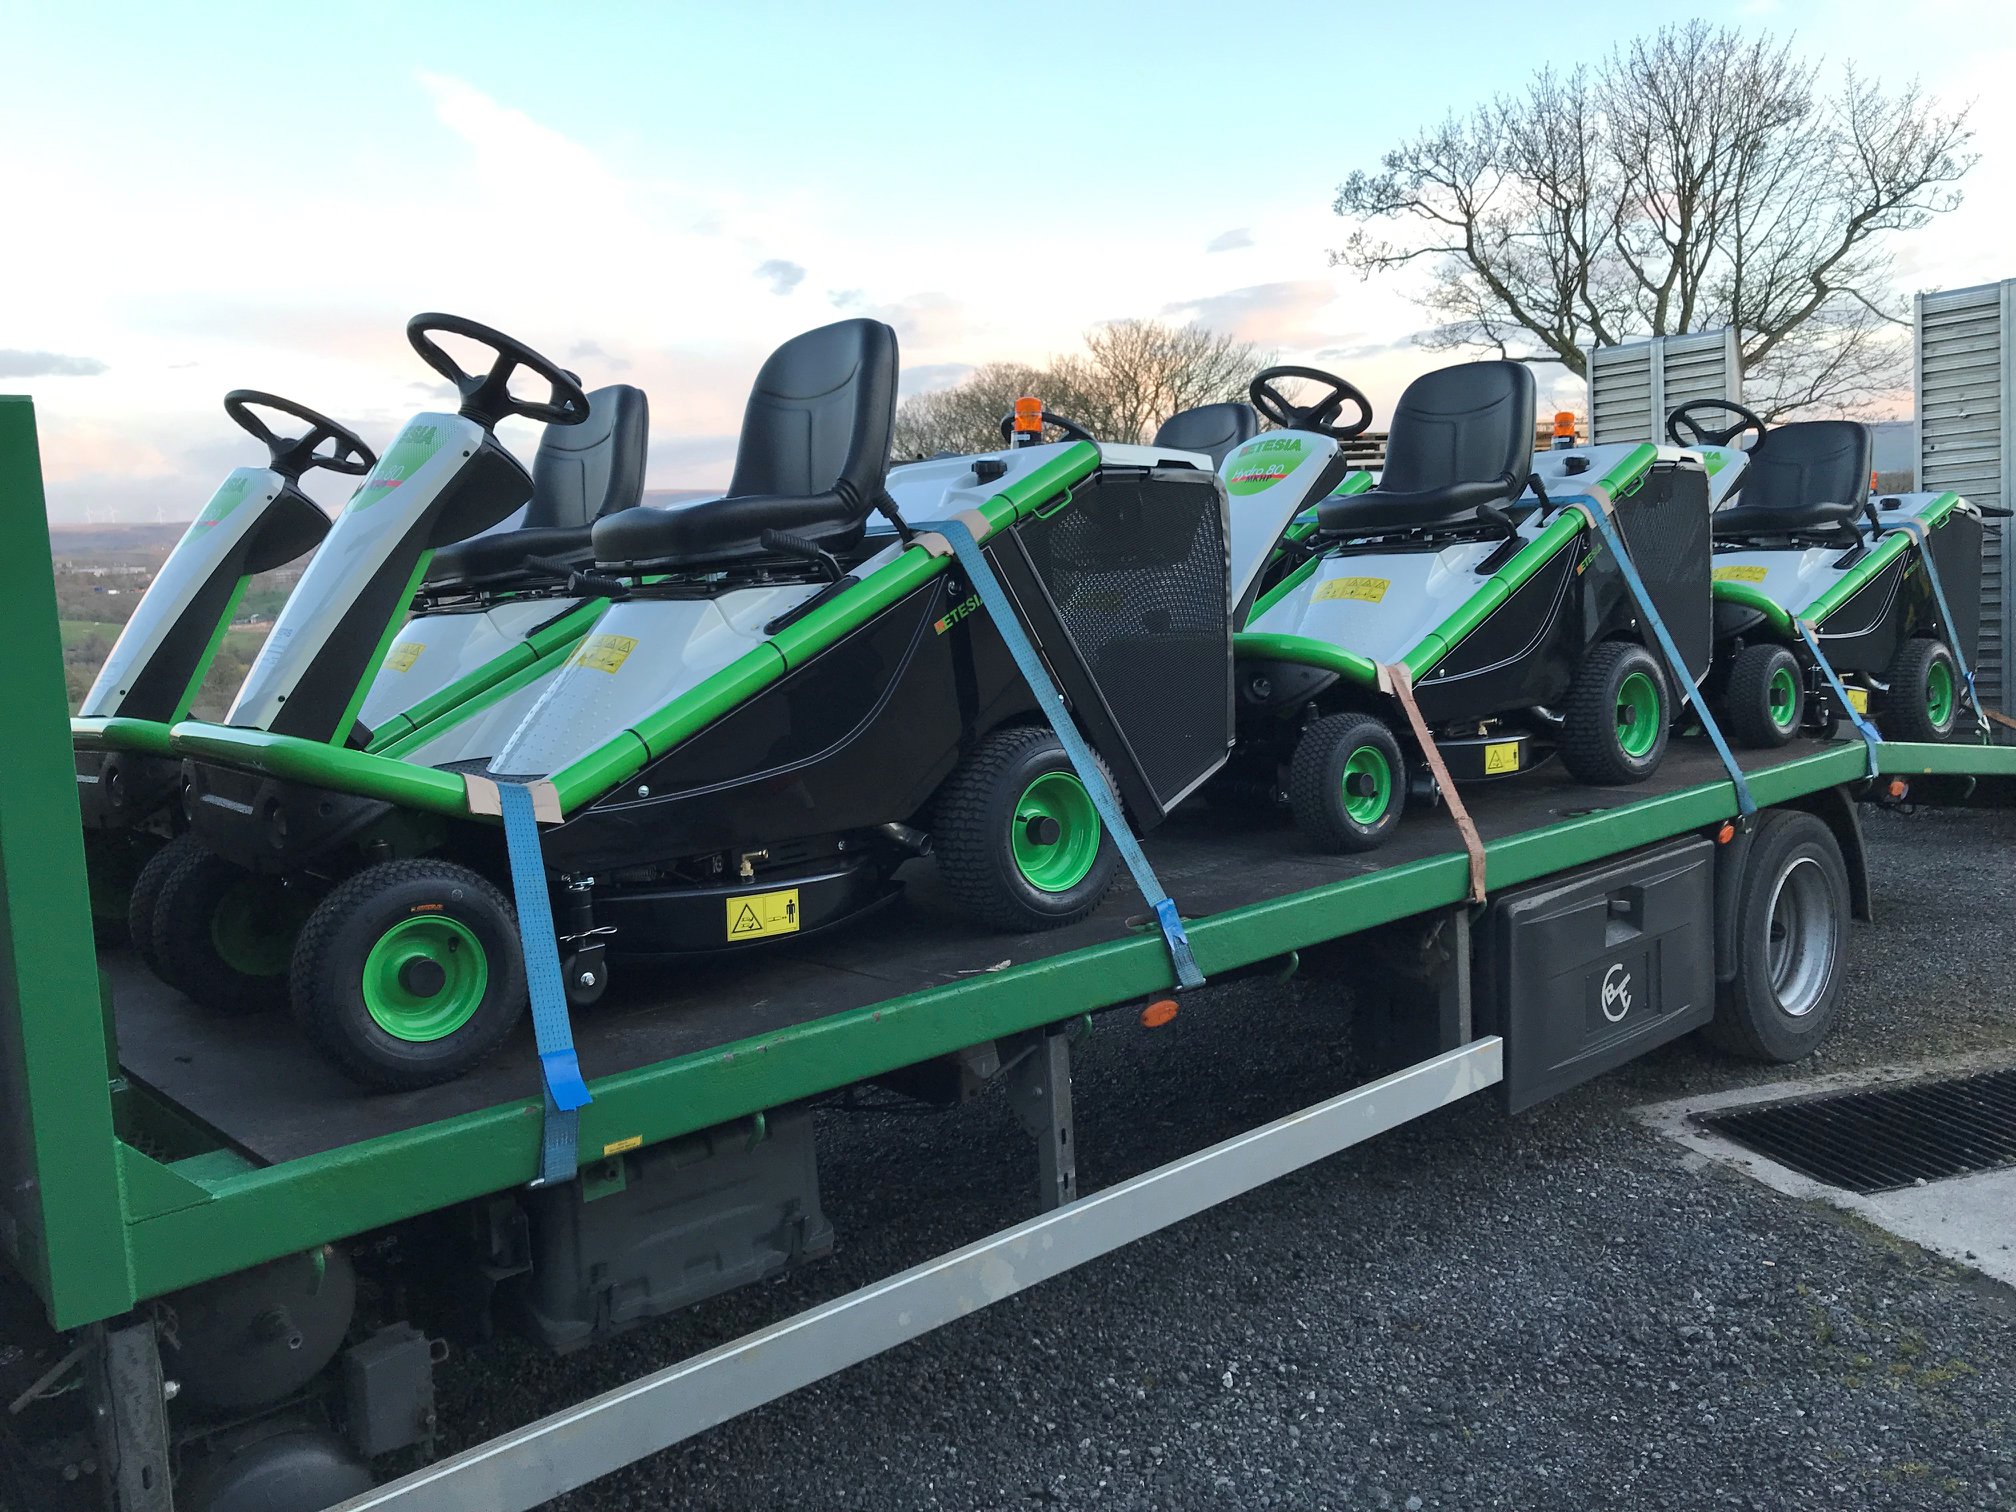 Etesia Hydro 80 commercial mowers